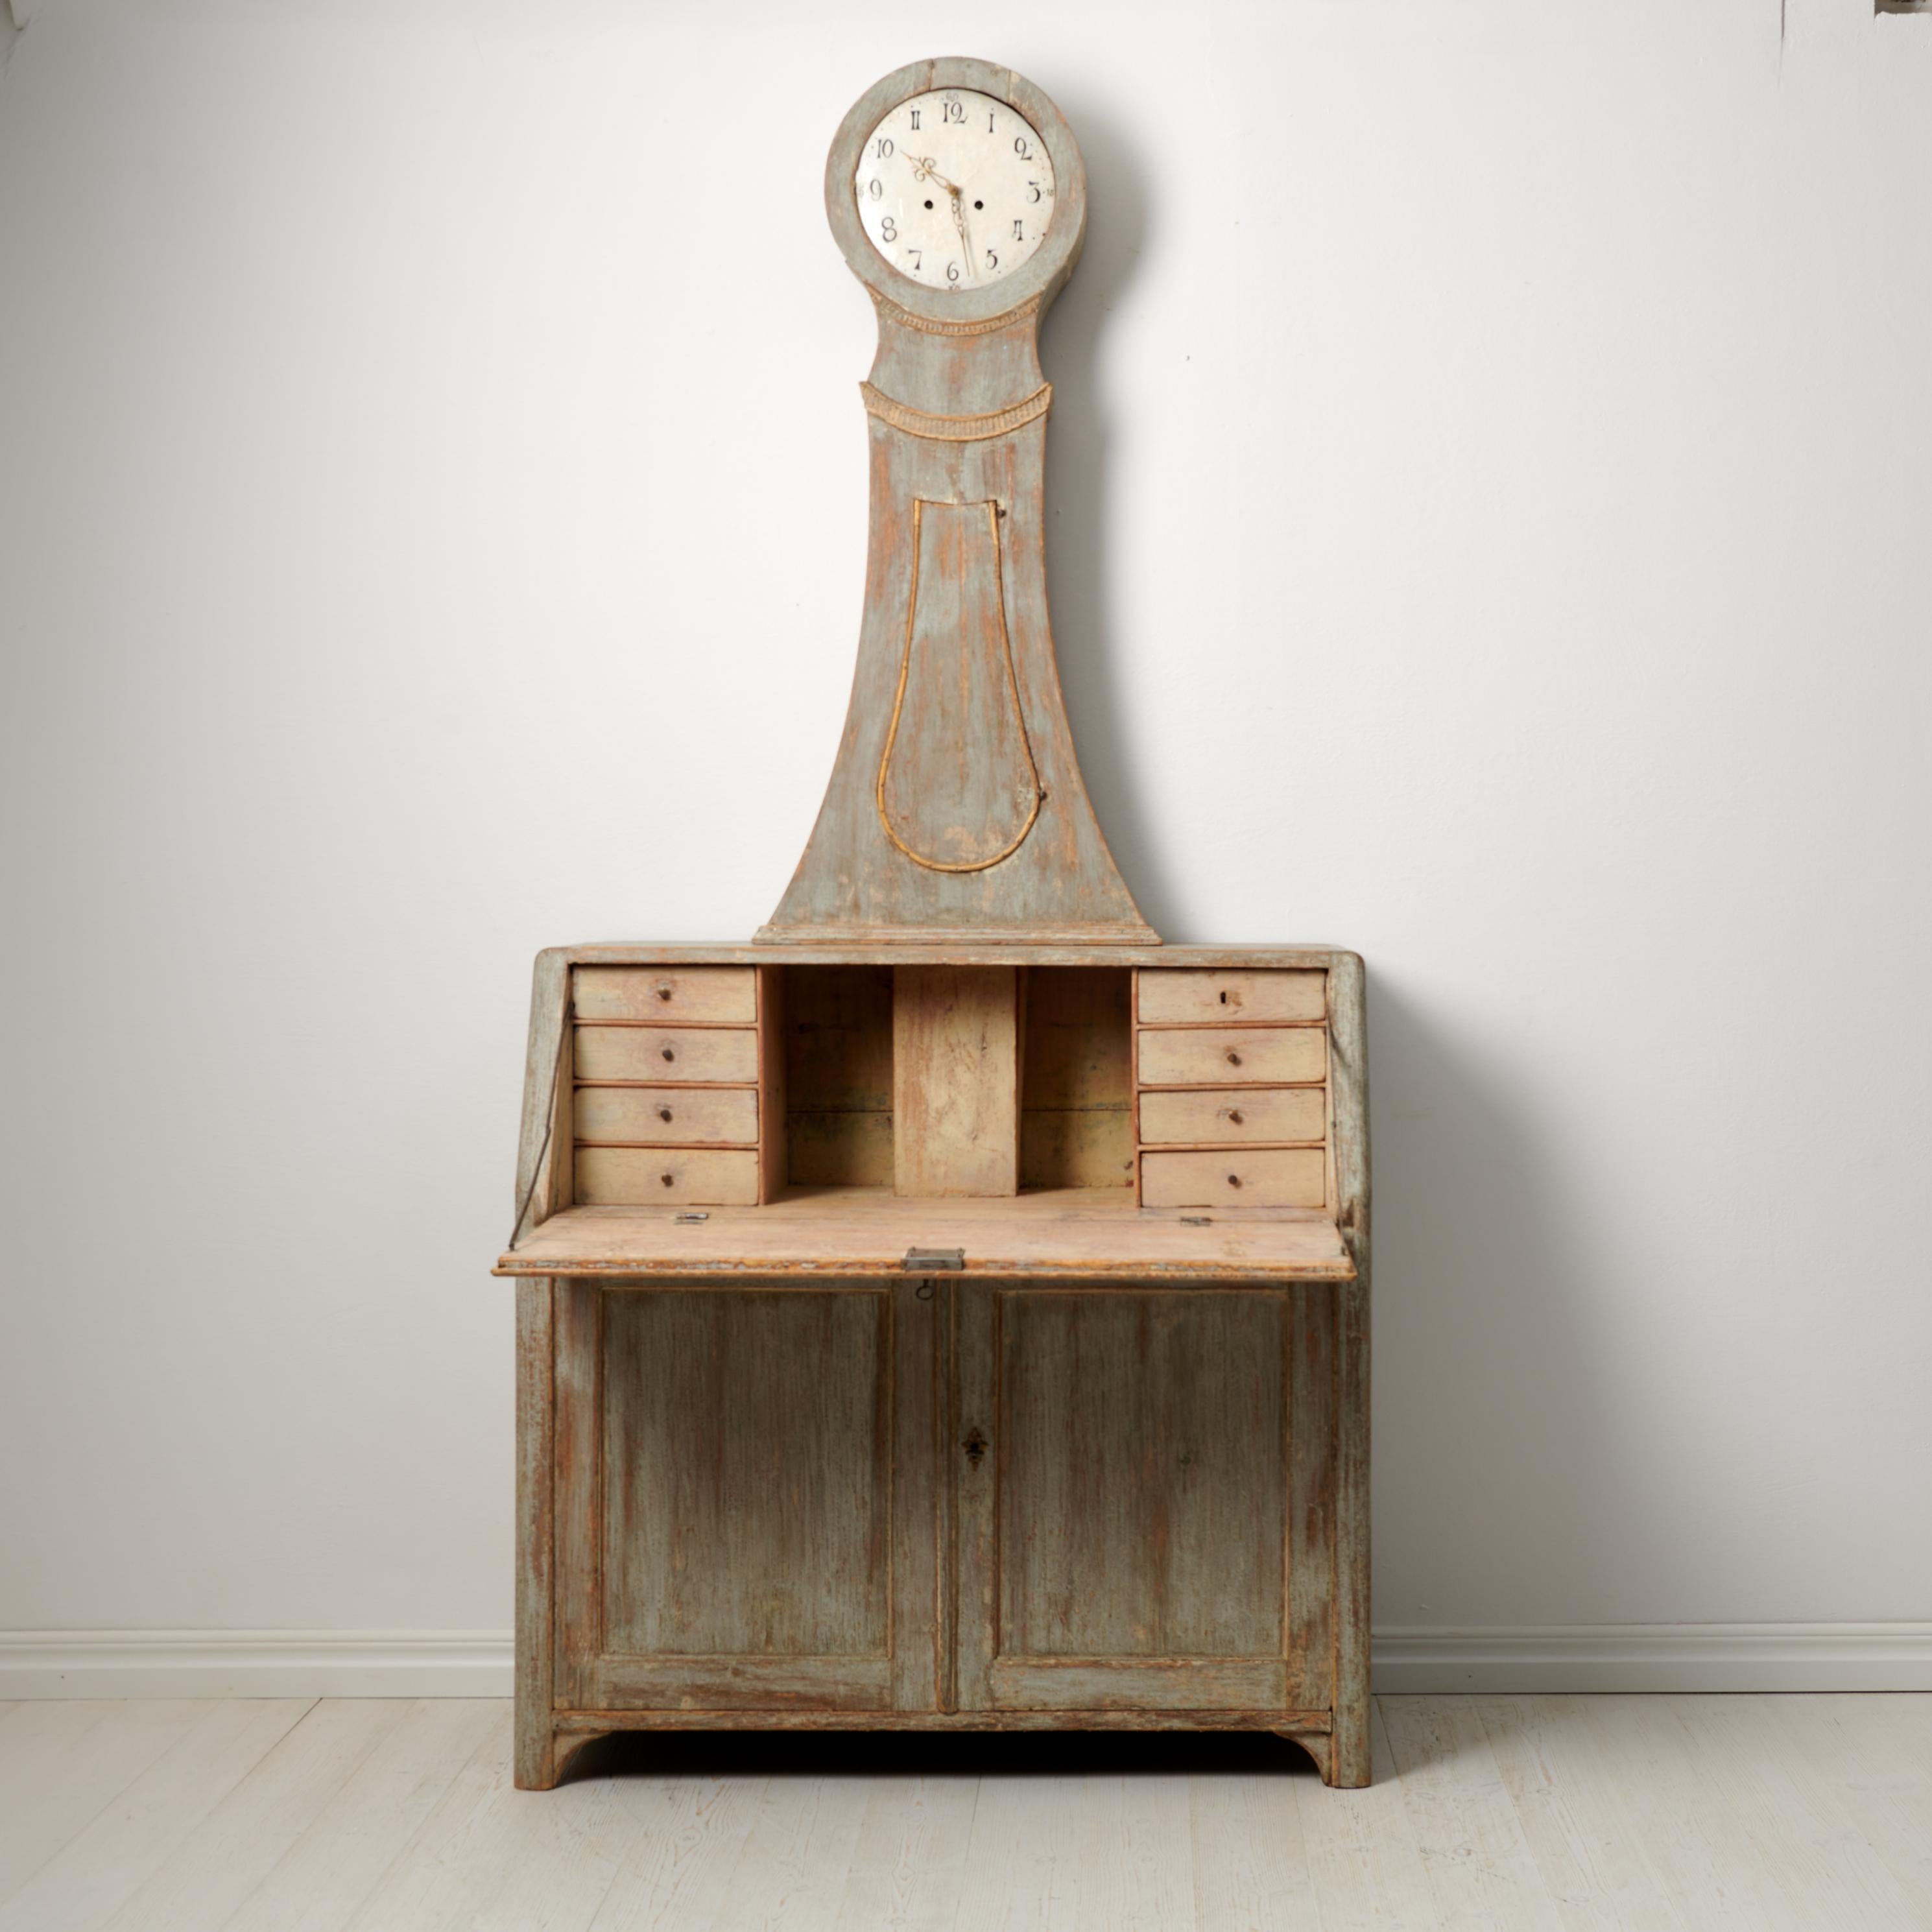 Rare Swedish antique clock secretary desk made around 1820 to 1840 in northern Sweden. The desk and body of the clock are made by hand in solid pine. It has a hinged desktop surface and interior drawers inside as well as the stately clock. Original